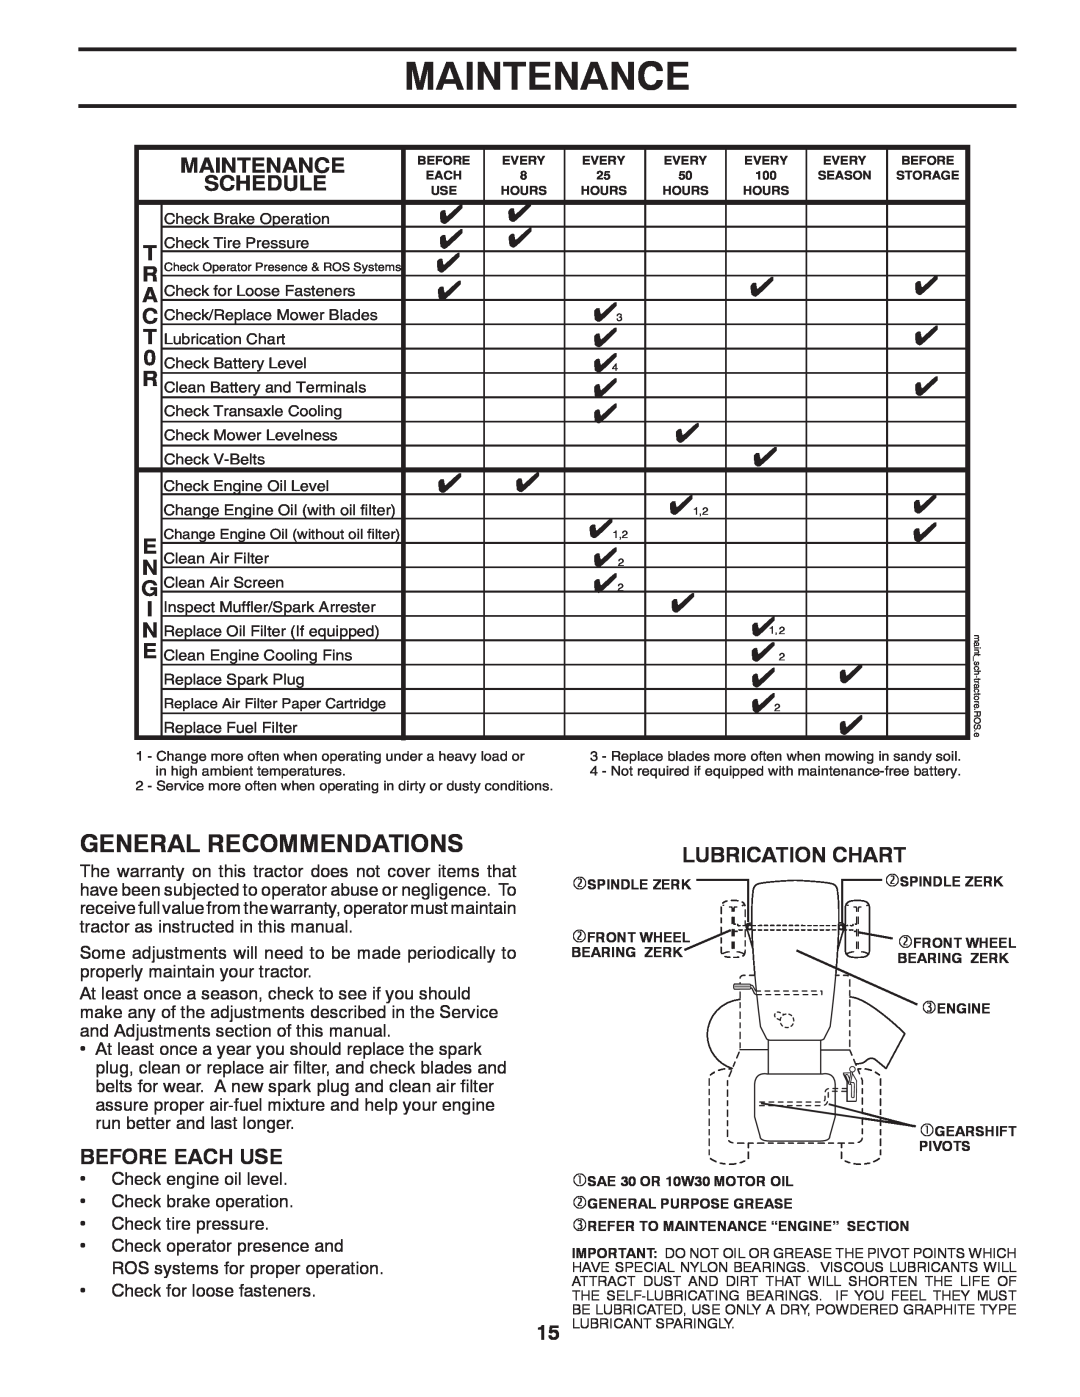 Poulan PB19542LT manual Maintenance, General Recommendations, Schedule, Before Each Use, Lubrication Chart 